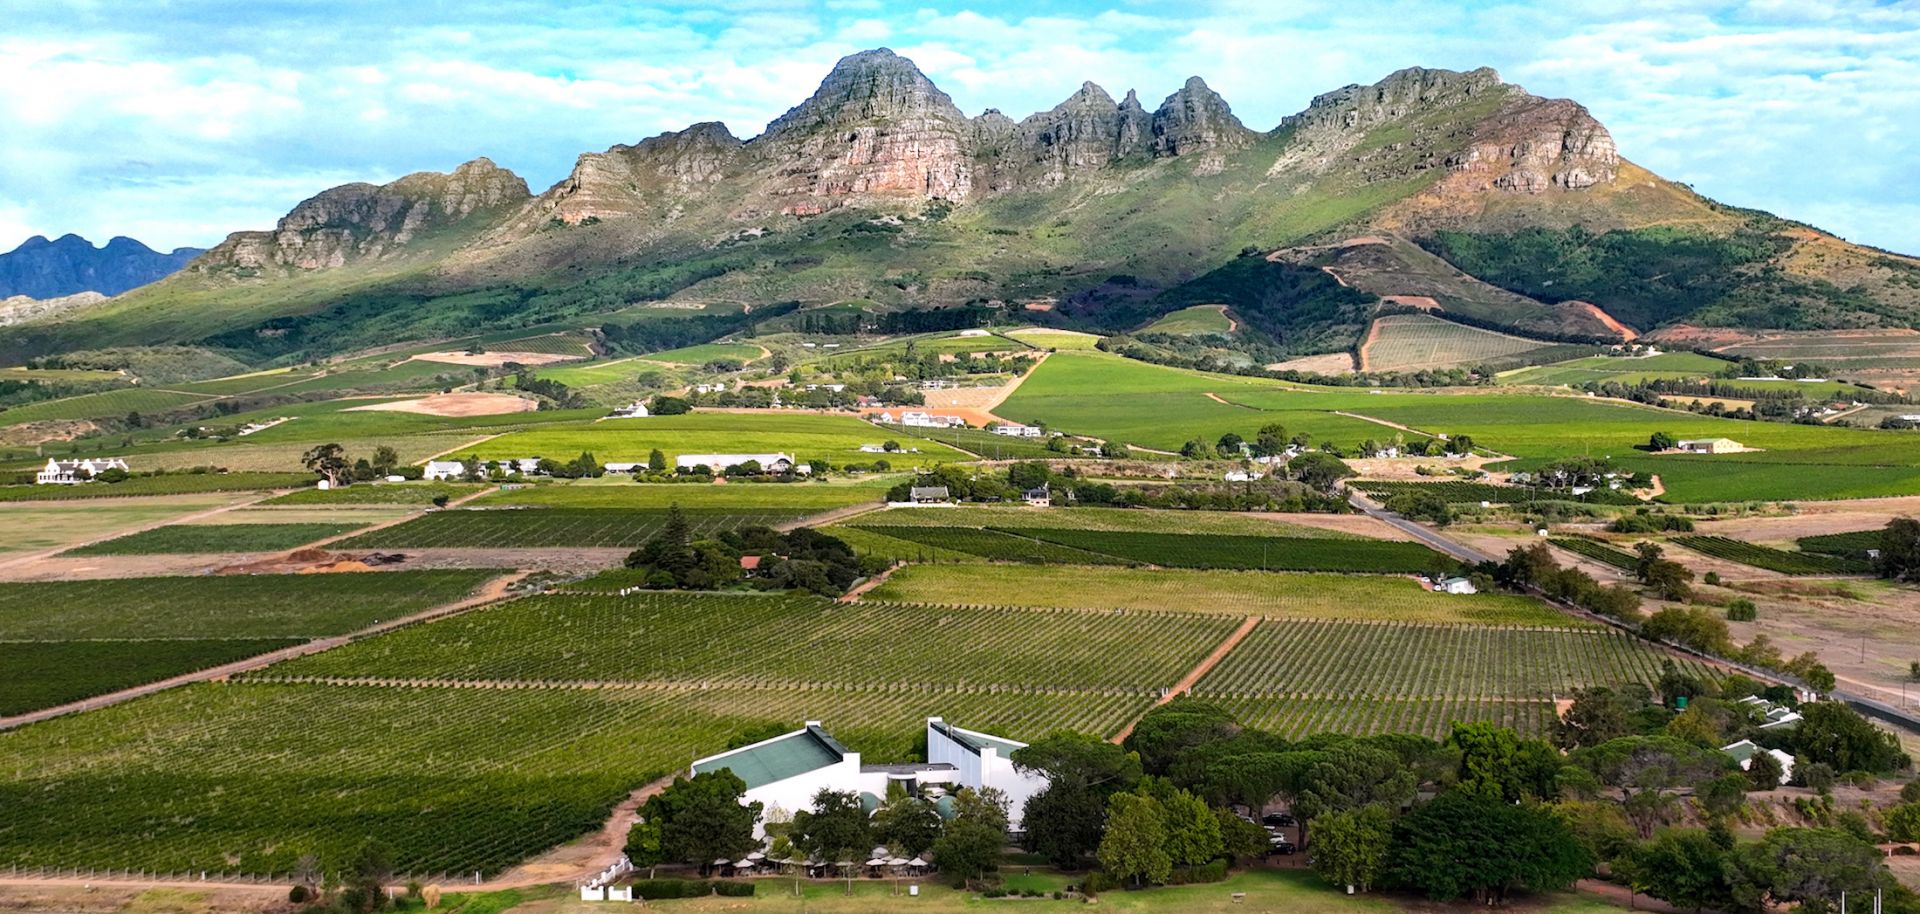 An evening aerial view of the Eikendal Vineyards winery estate on the slopes of the Helderberg Mountain during harvest season on March 15 in Western Cape province's wine-producing town of Stellenbosch, South Africa.